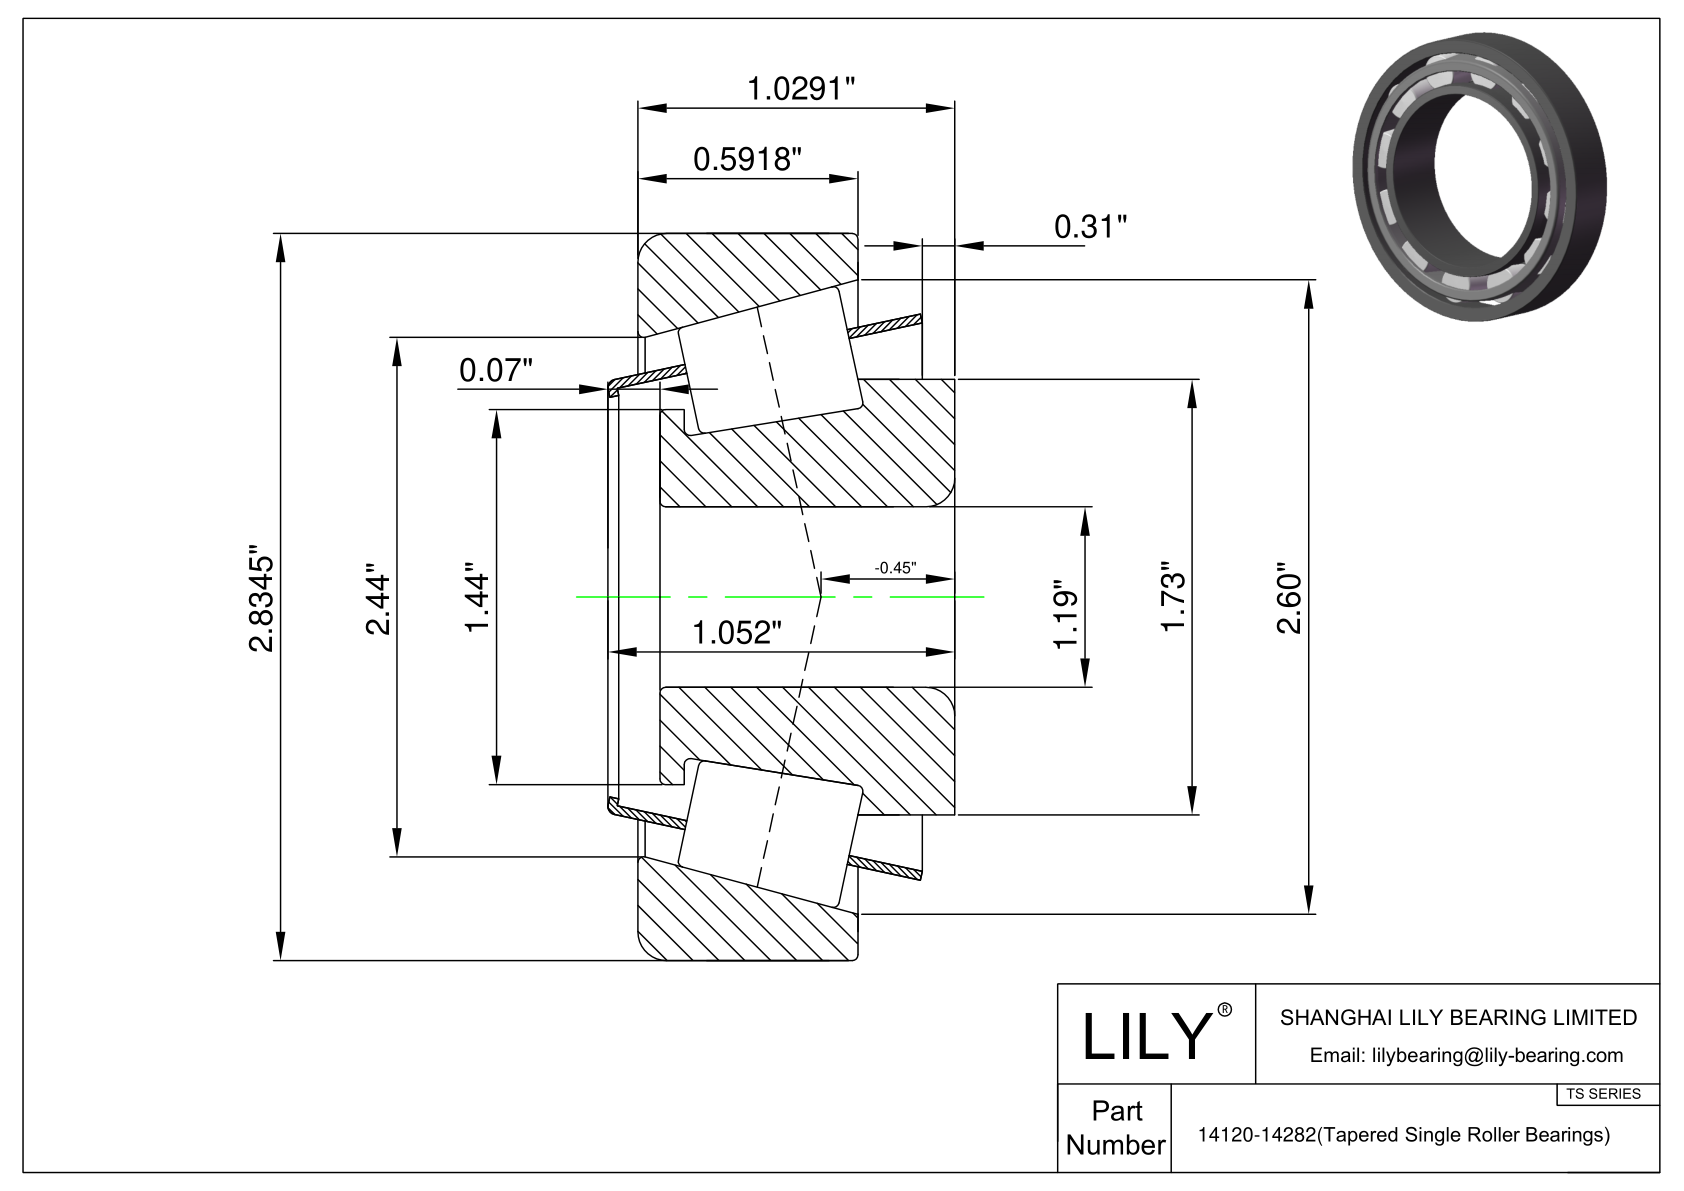 14120-14282 TS (Tapered Single Roller Bearings) (Imperial) cad drawing